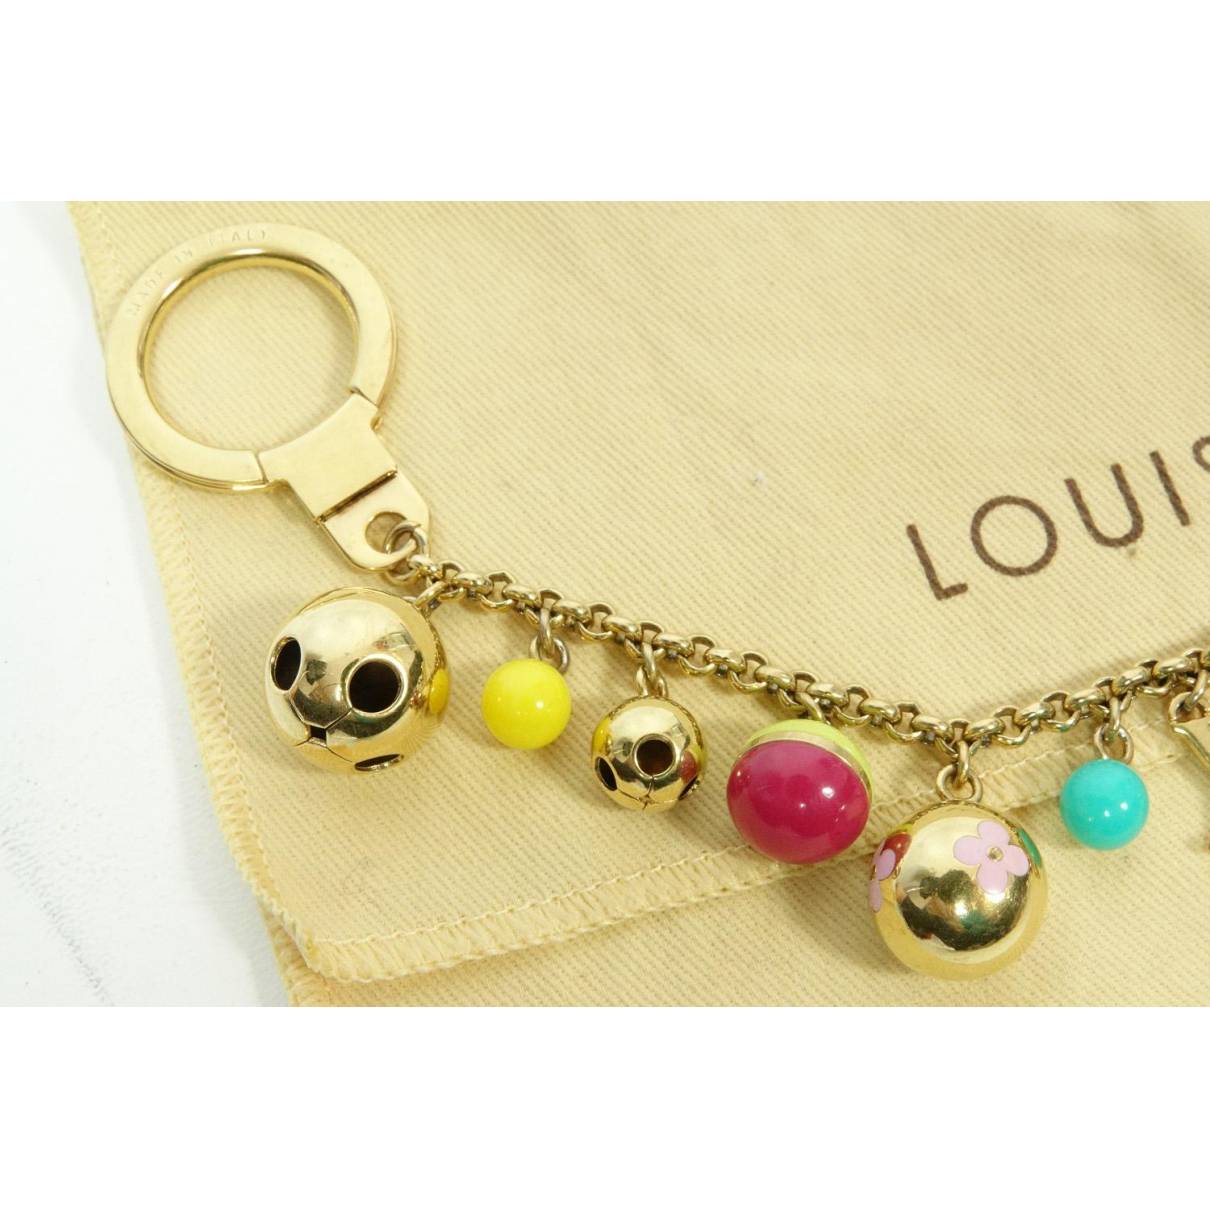 Leather bag charm Louis Vuitton Gold in Leather - 24969877